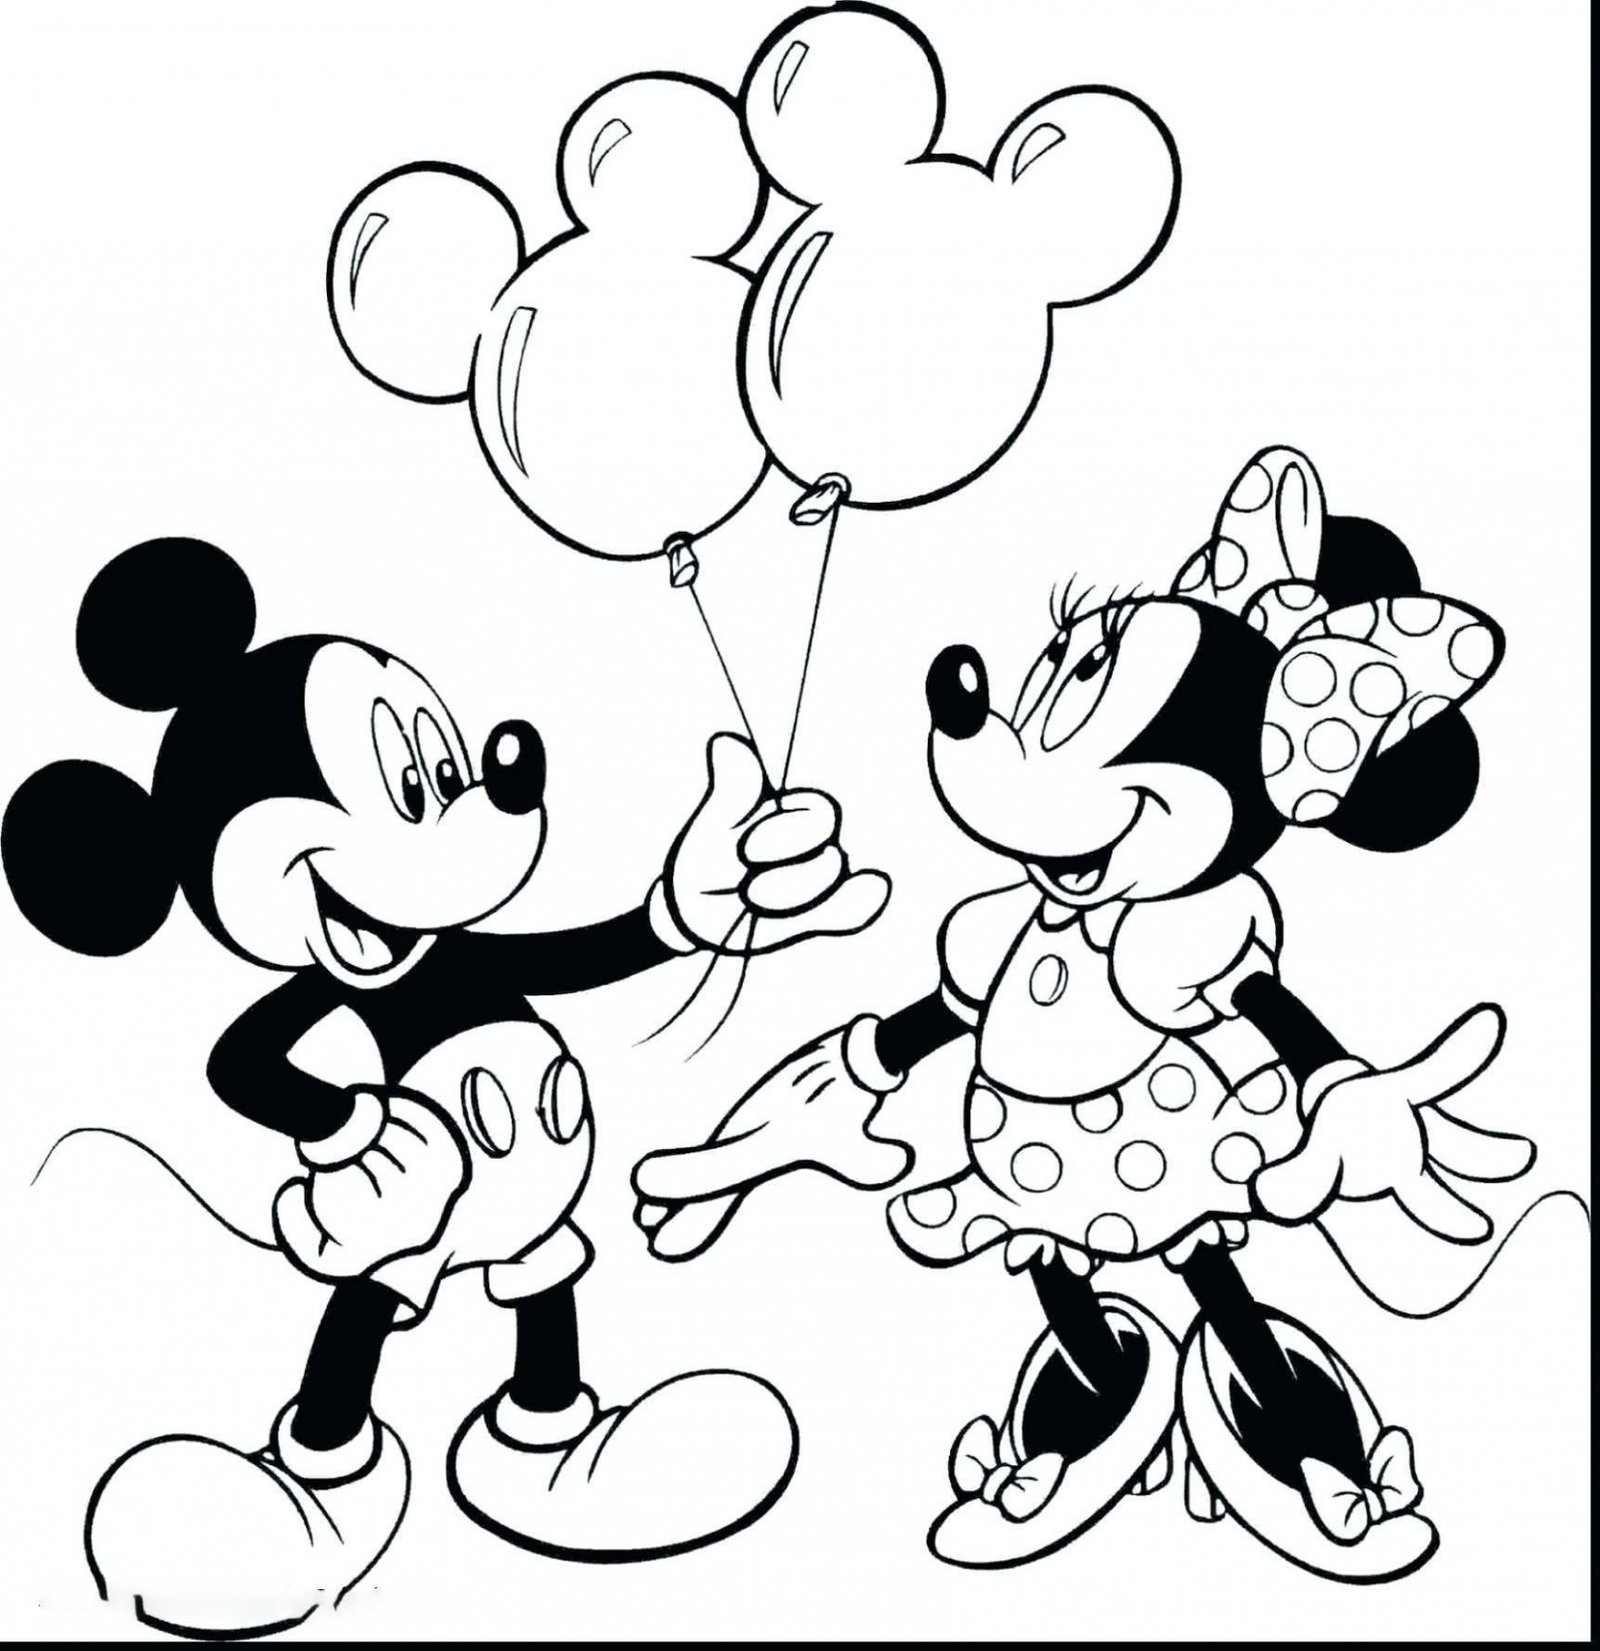 Mickey mouse coloring pages printable for free download